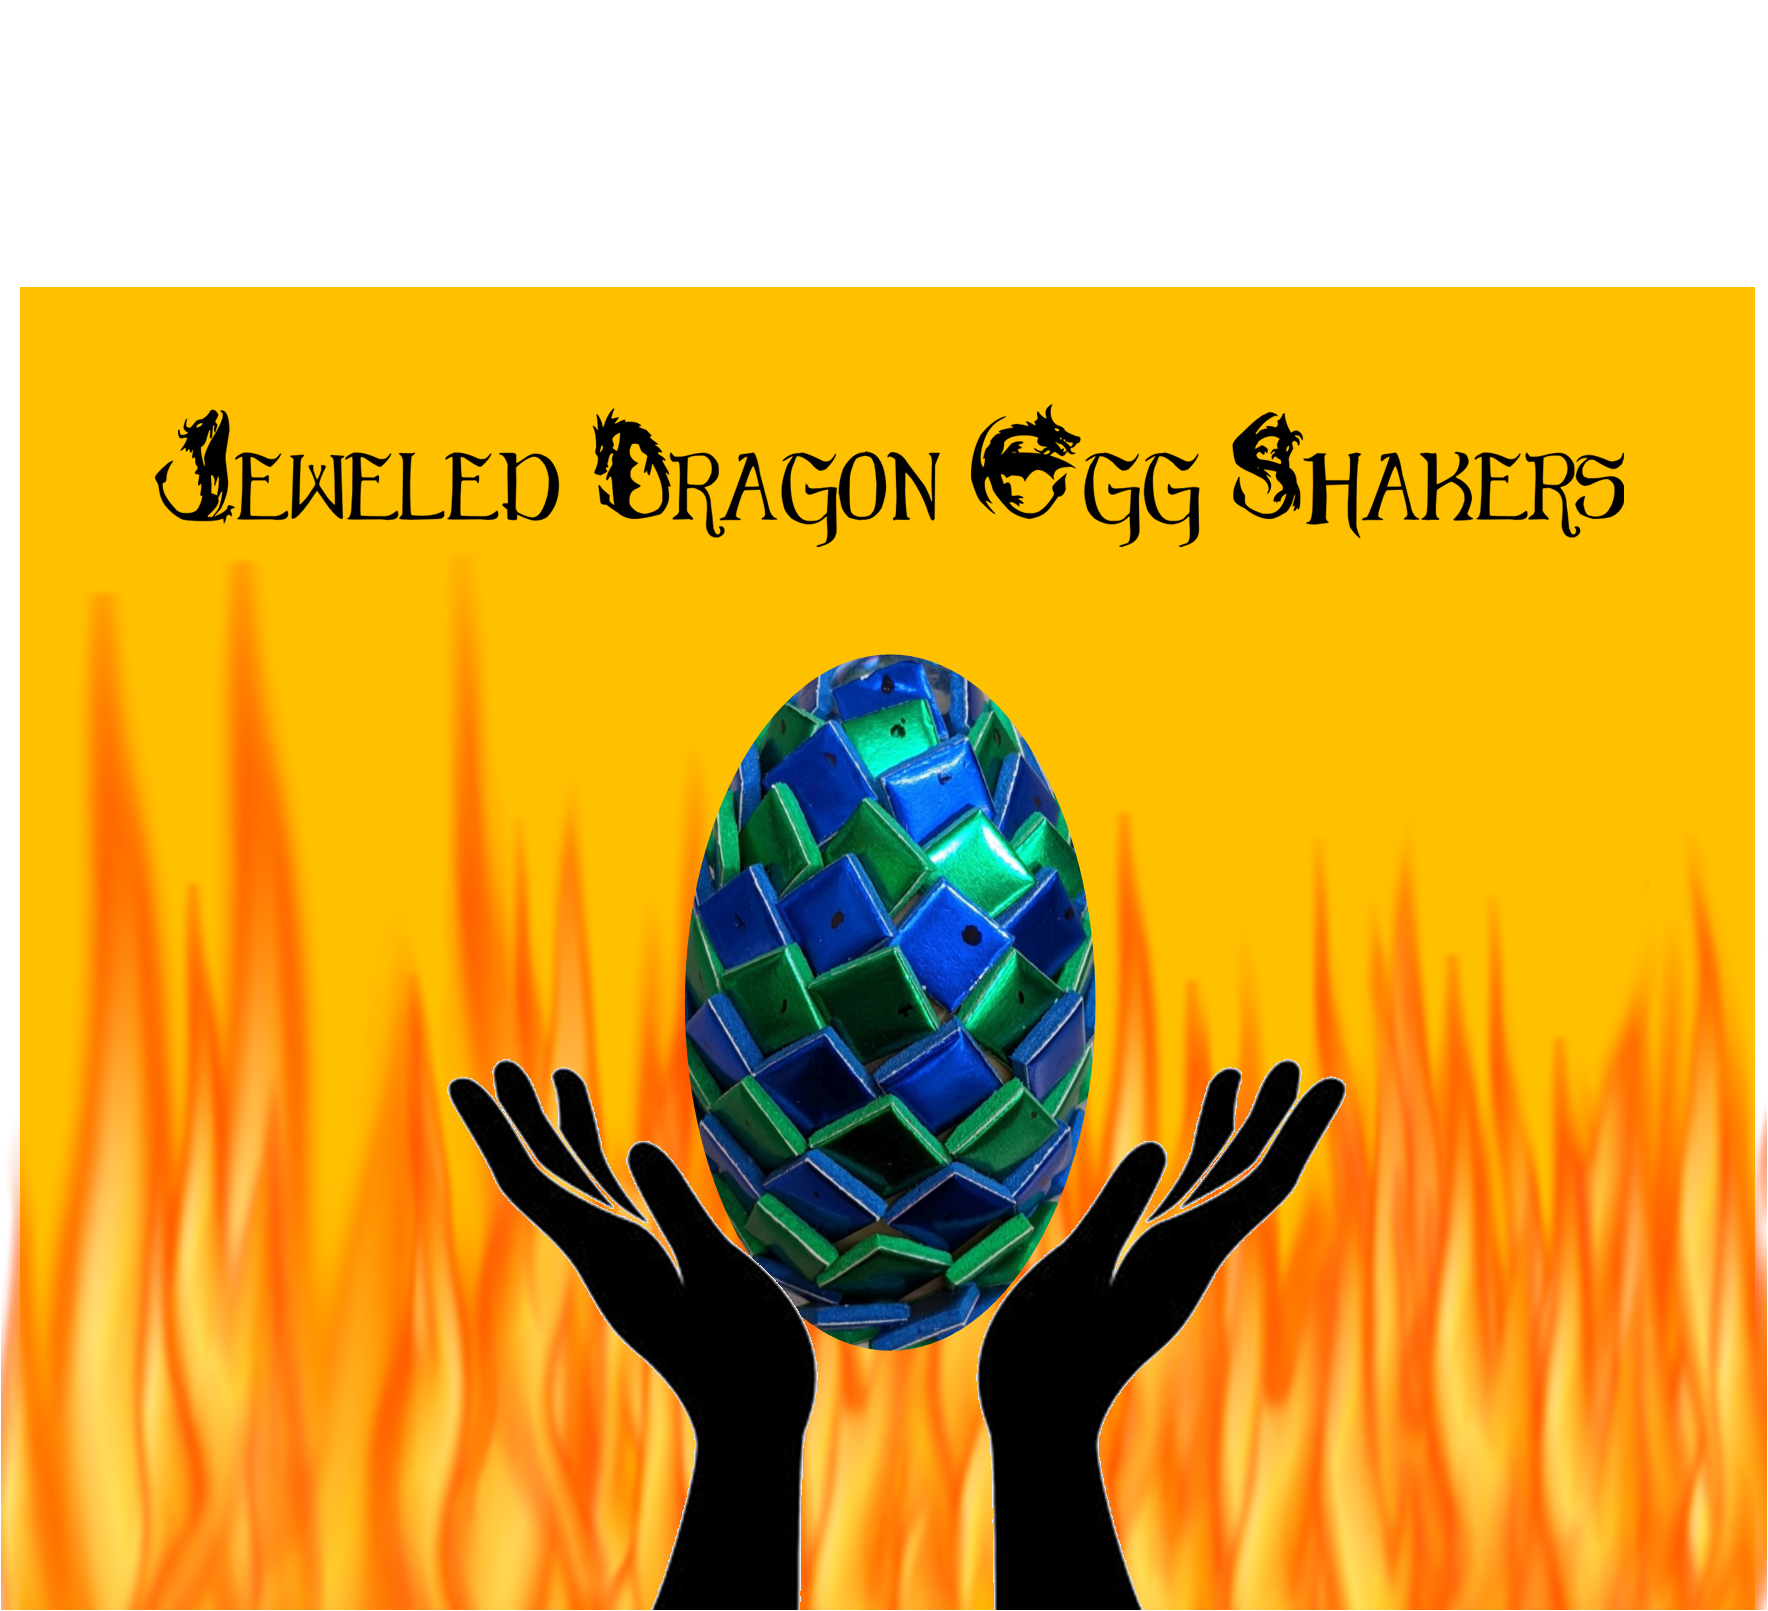 Jeweled Dragon Egg Shakers at Main Library. Pick up kit via curbside starting July 27th, while supplies last.